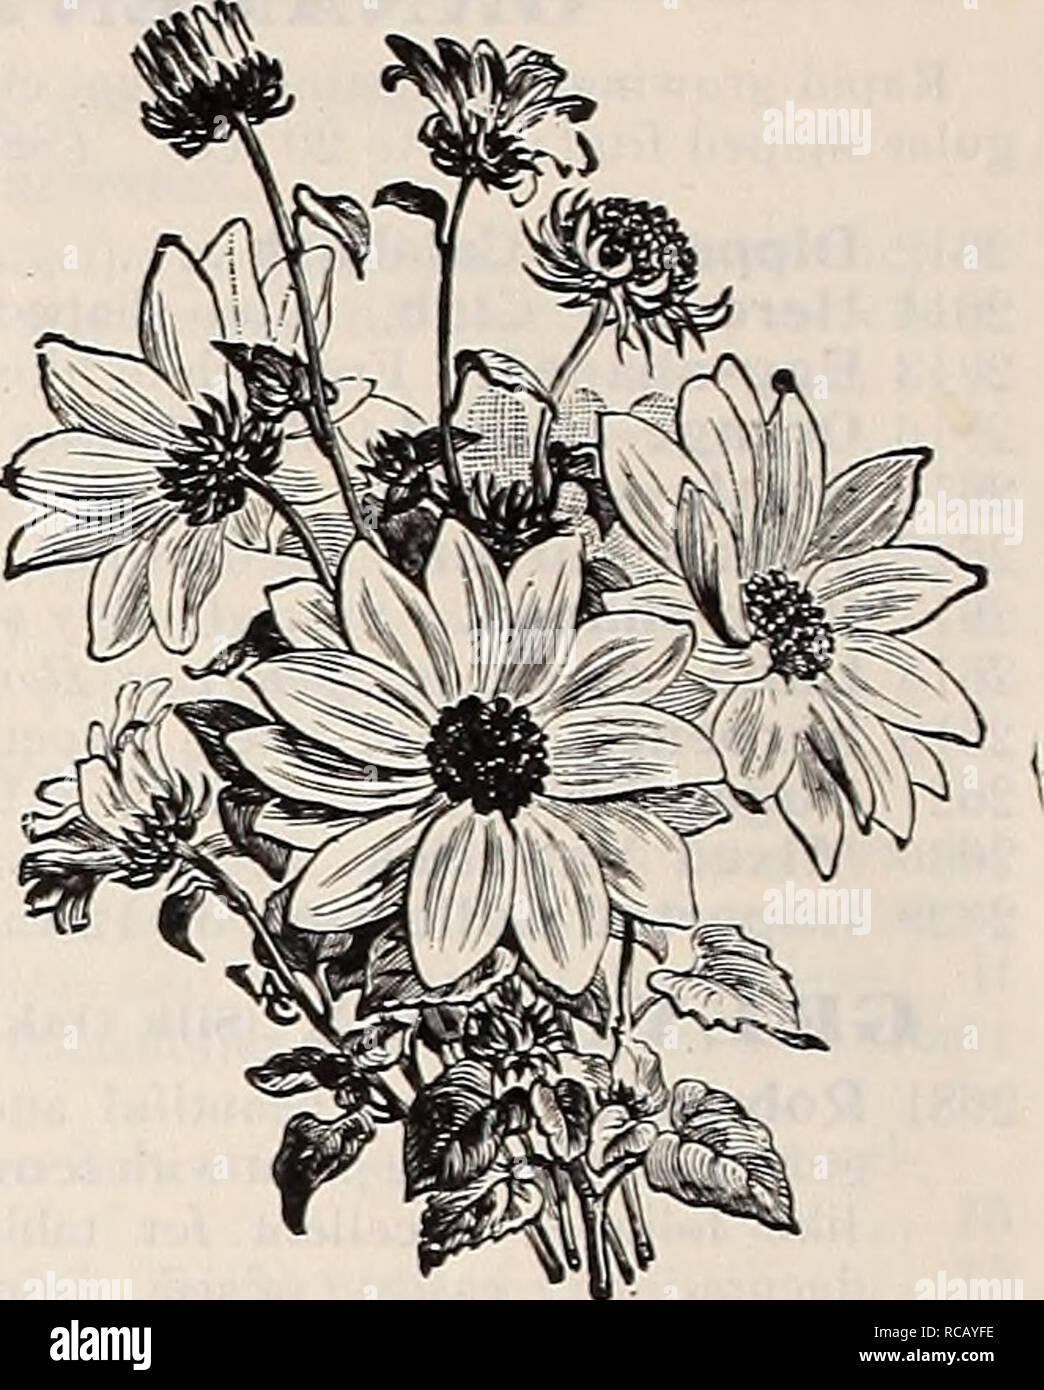 . Dreer's garden book : 1906. Seeds Catalogs; Nursery stock Catalogs; Gardening Equipment and supplies Catalogs; Flowers Seeds Catalogs; Vegetables Seeds Catalogs; Fruit Seeds Catalogs. Double Globe Sunflower. 2700. MiNiATi'RE Sunflower, They all difl&quot;er from the parent, most of them bein  larger, and many with curiously-twisted petals. The prevailing colors are p-.le-yellow, golden-yellow and creamy-white, some with black centres and all beautiful; for cutting they are indispensable. Oz.,60cts 10 2707 — Perkeo. A charming dwarf variety of the Miniature Sun- flower. The plants form com- p Stock Photo